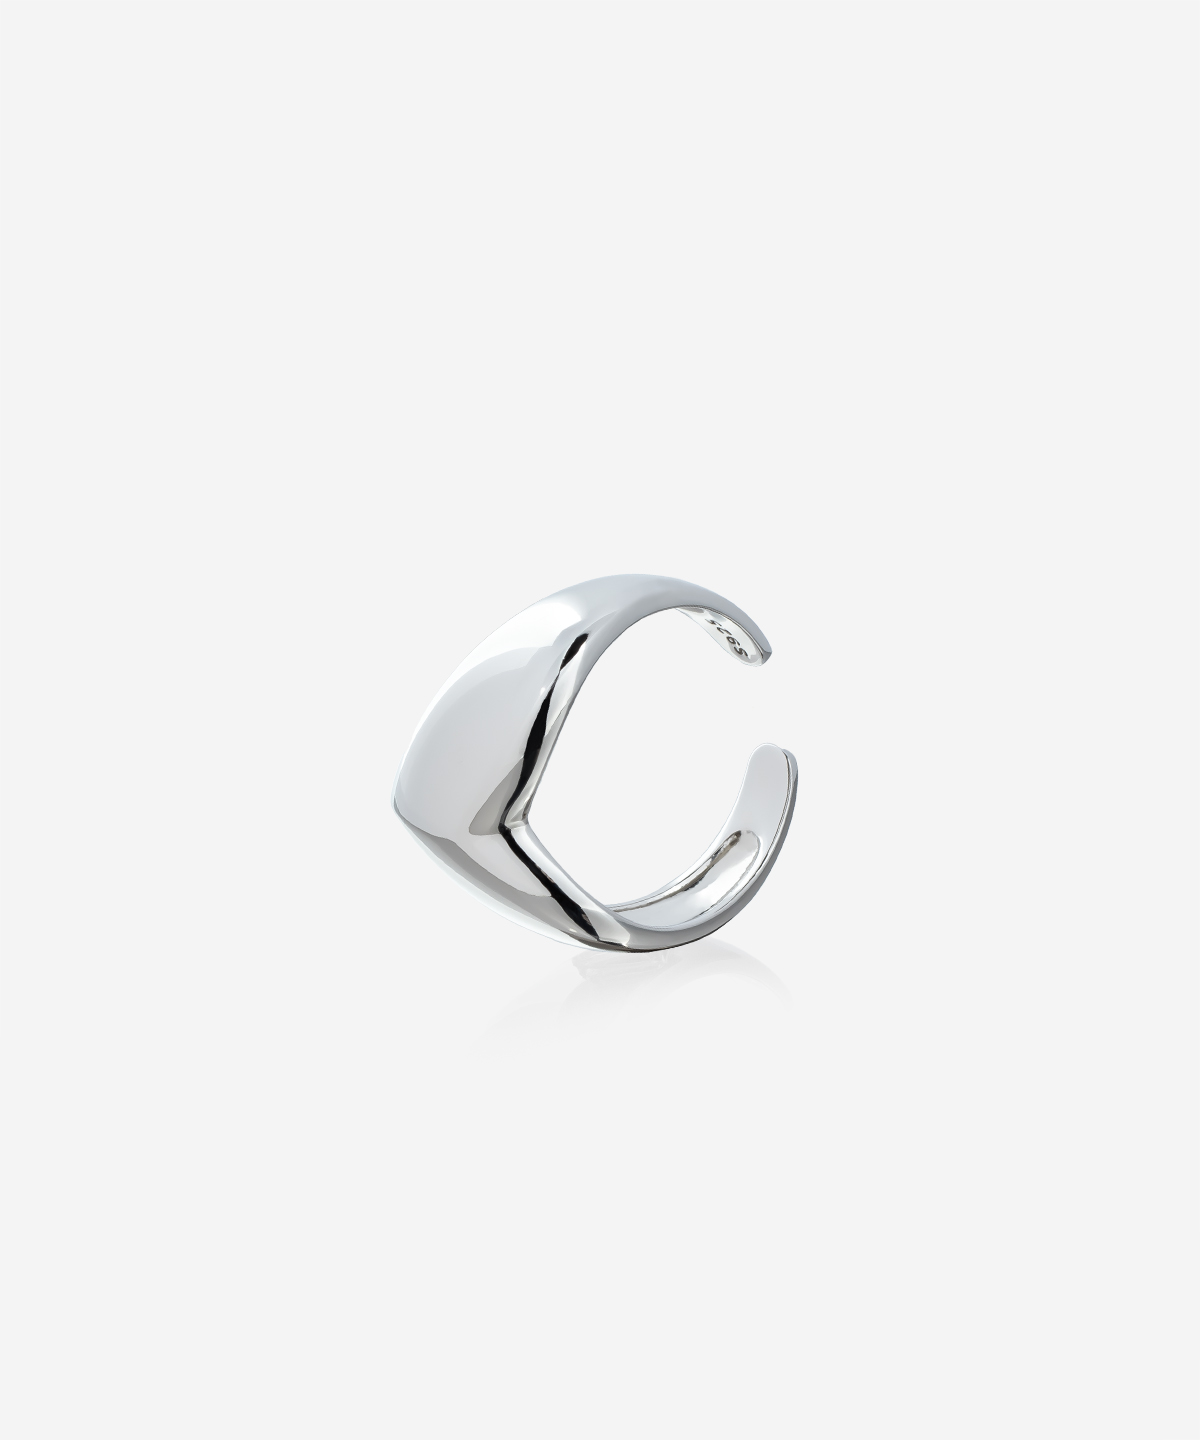 Amore dome silver ring